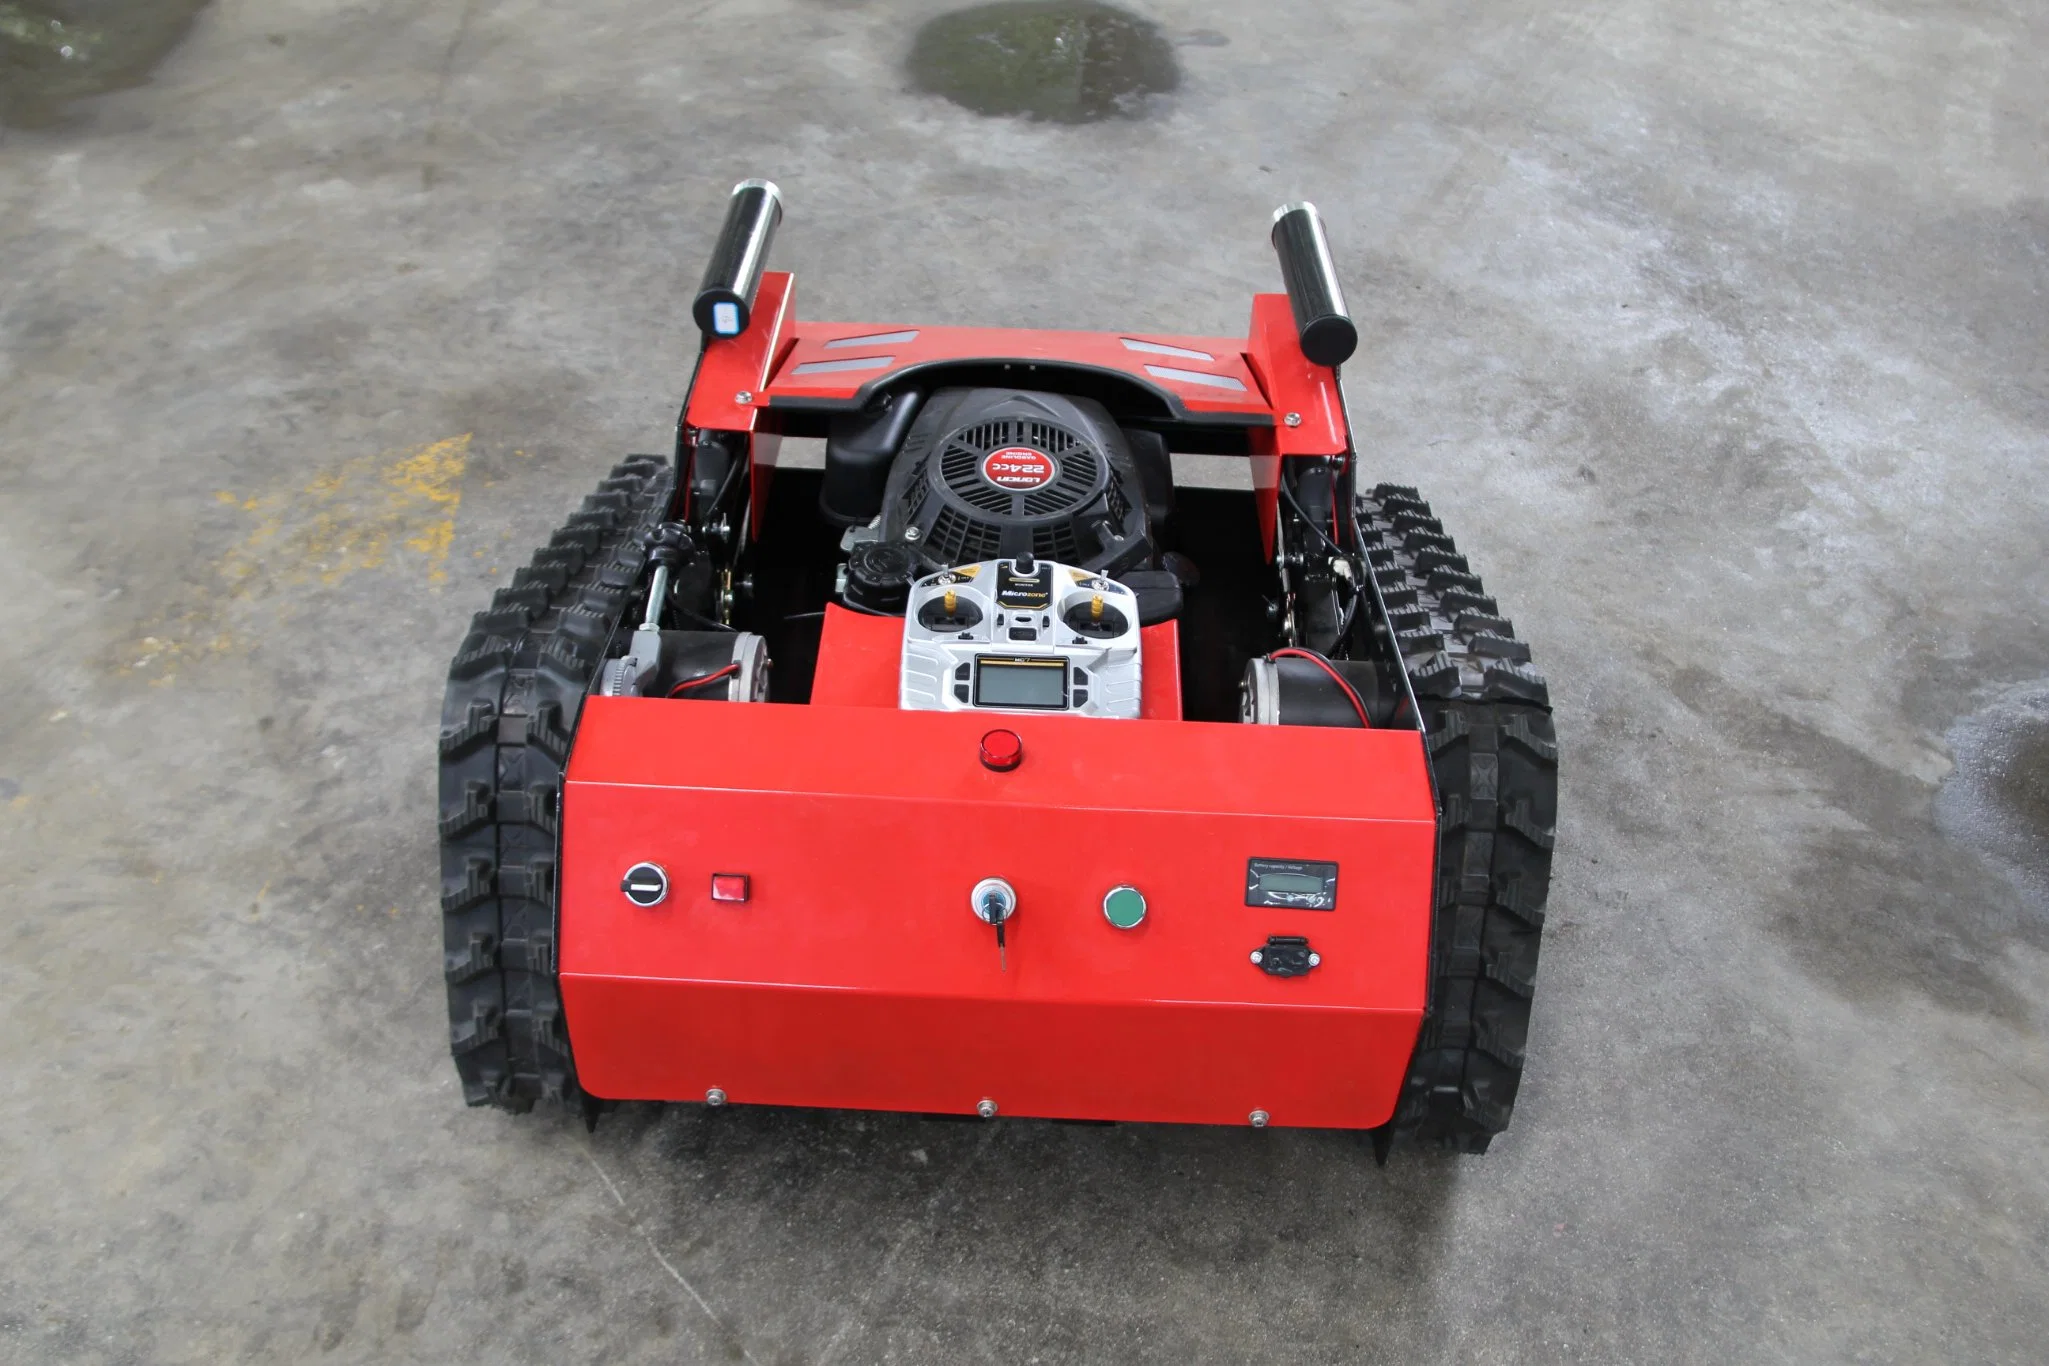 Robot Remote Control Lawn Mower Automatic Grass Cutter